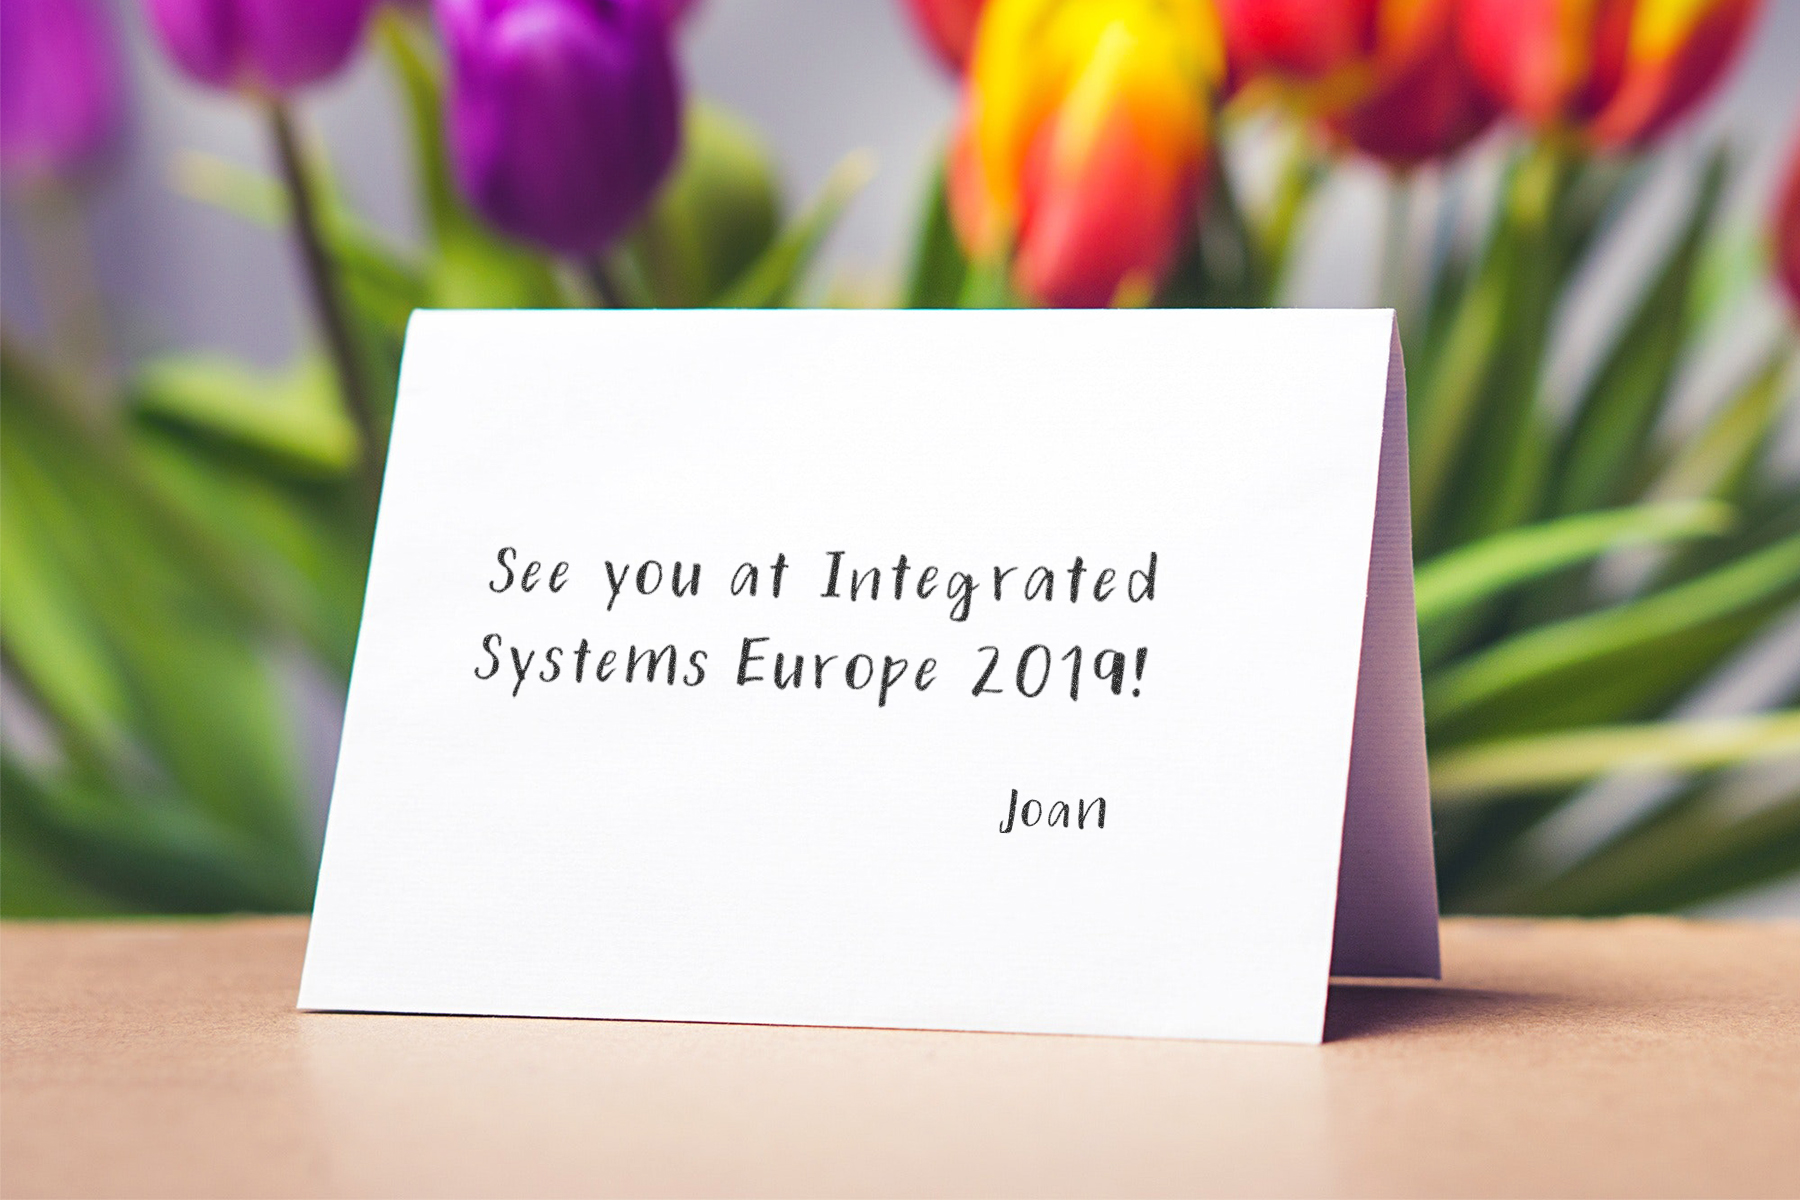 ISE 2019 in Amsterdam – the place to meet this February